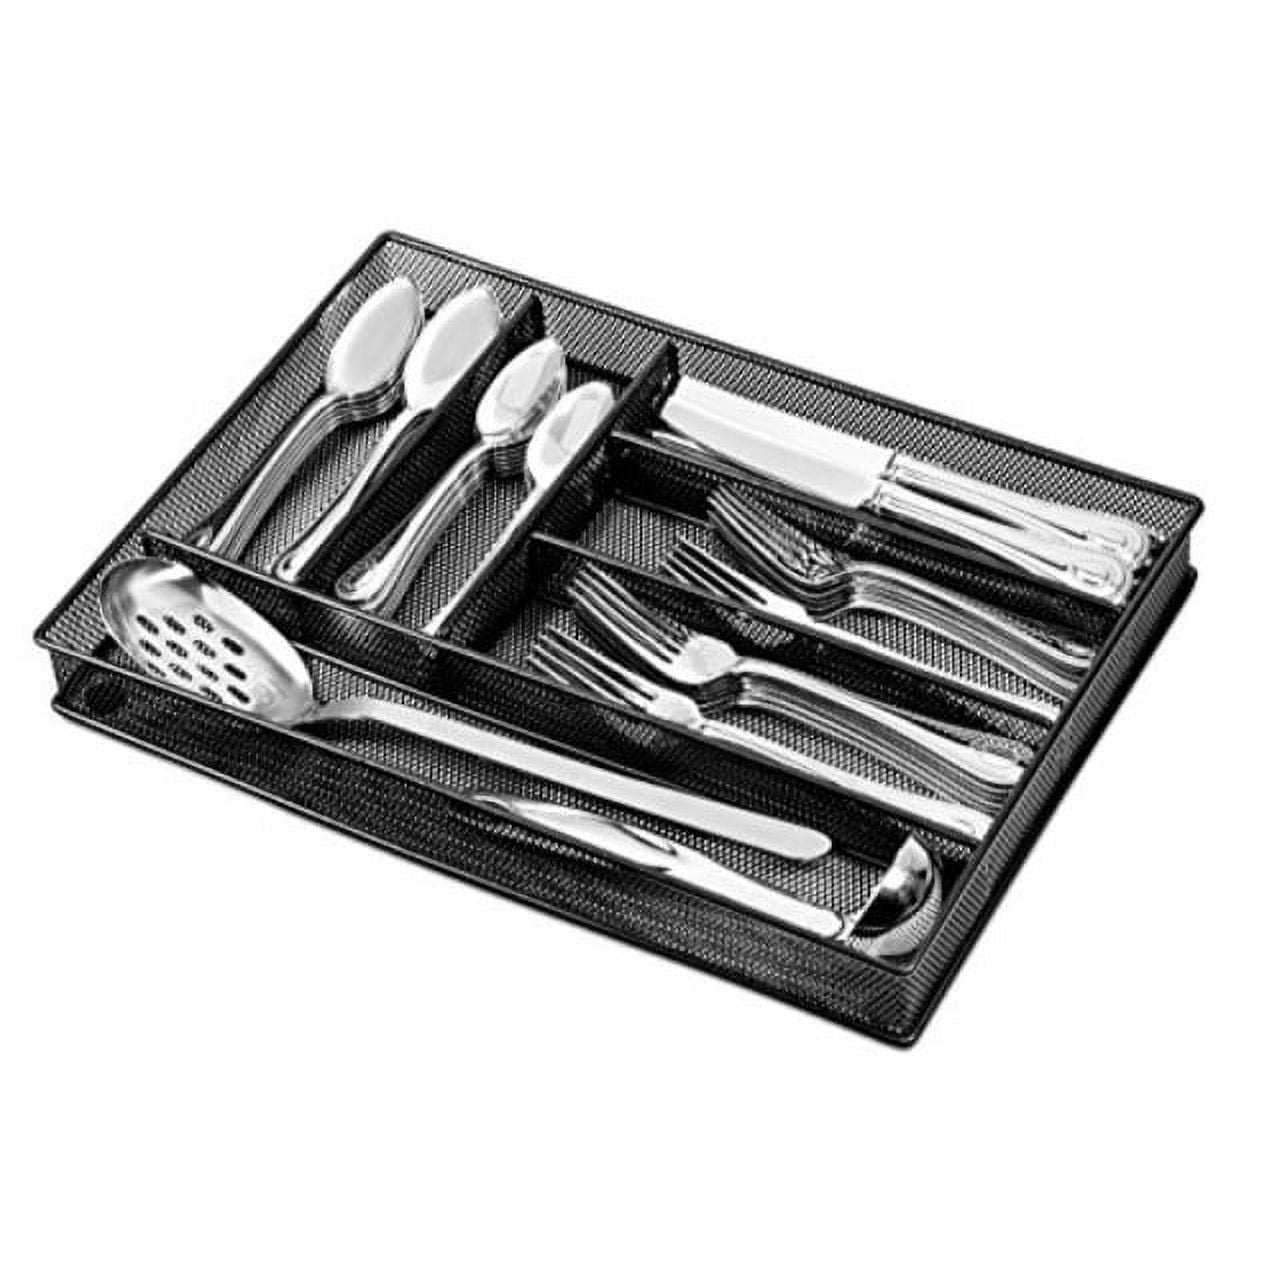 Flatware Drawer Organizer - Slip Resistant Kitchen Tray with 6 Sections to  Neatly Arrange Cutlery and Serving Utensils. Also Great to Keep Your Desk  Drawer and Office Supplies Well Organized (Black) 